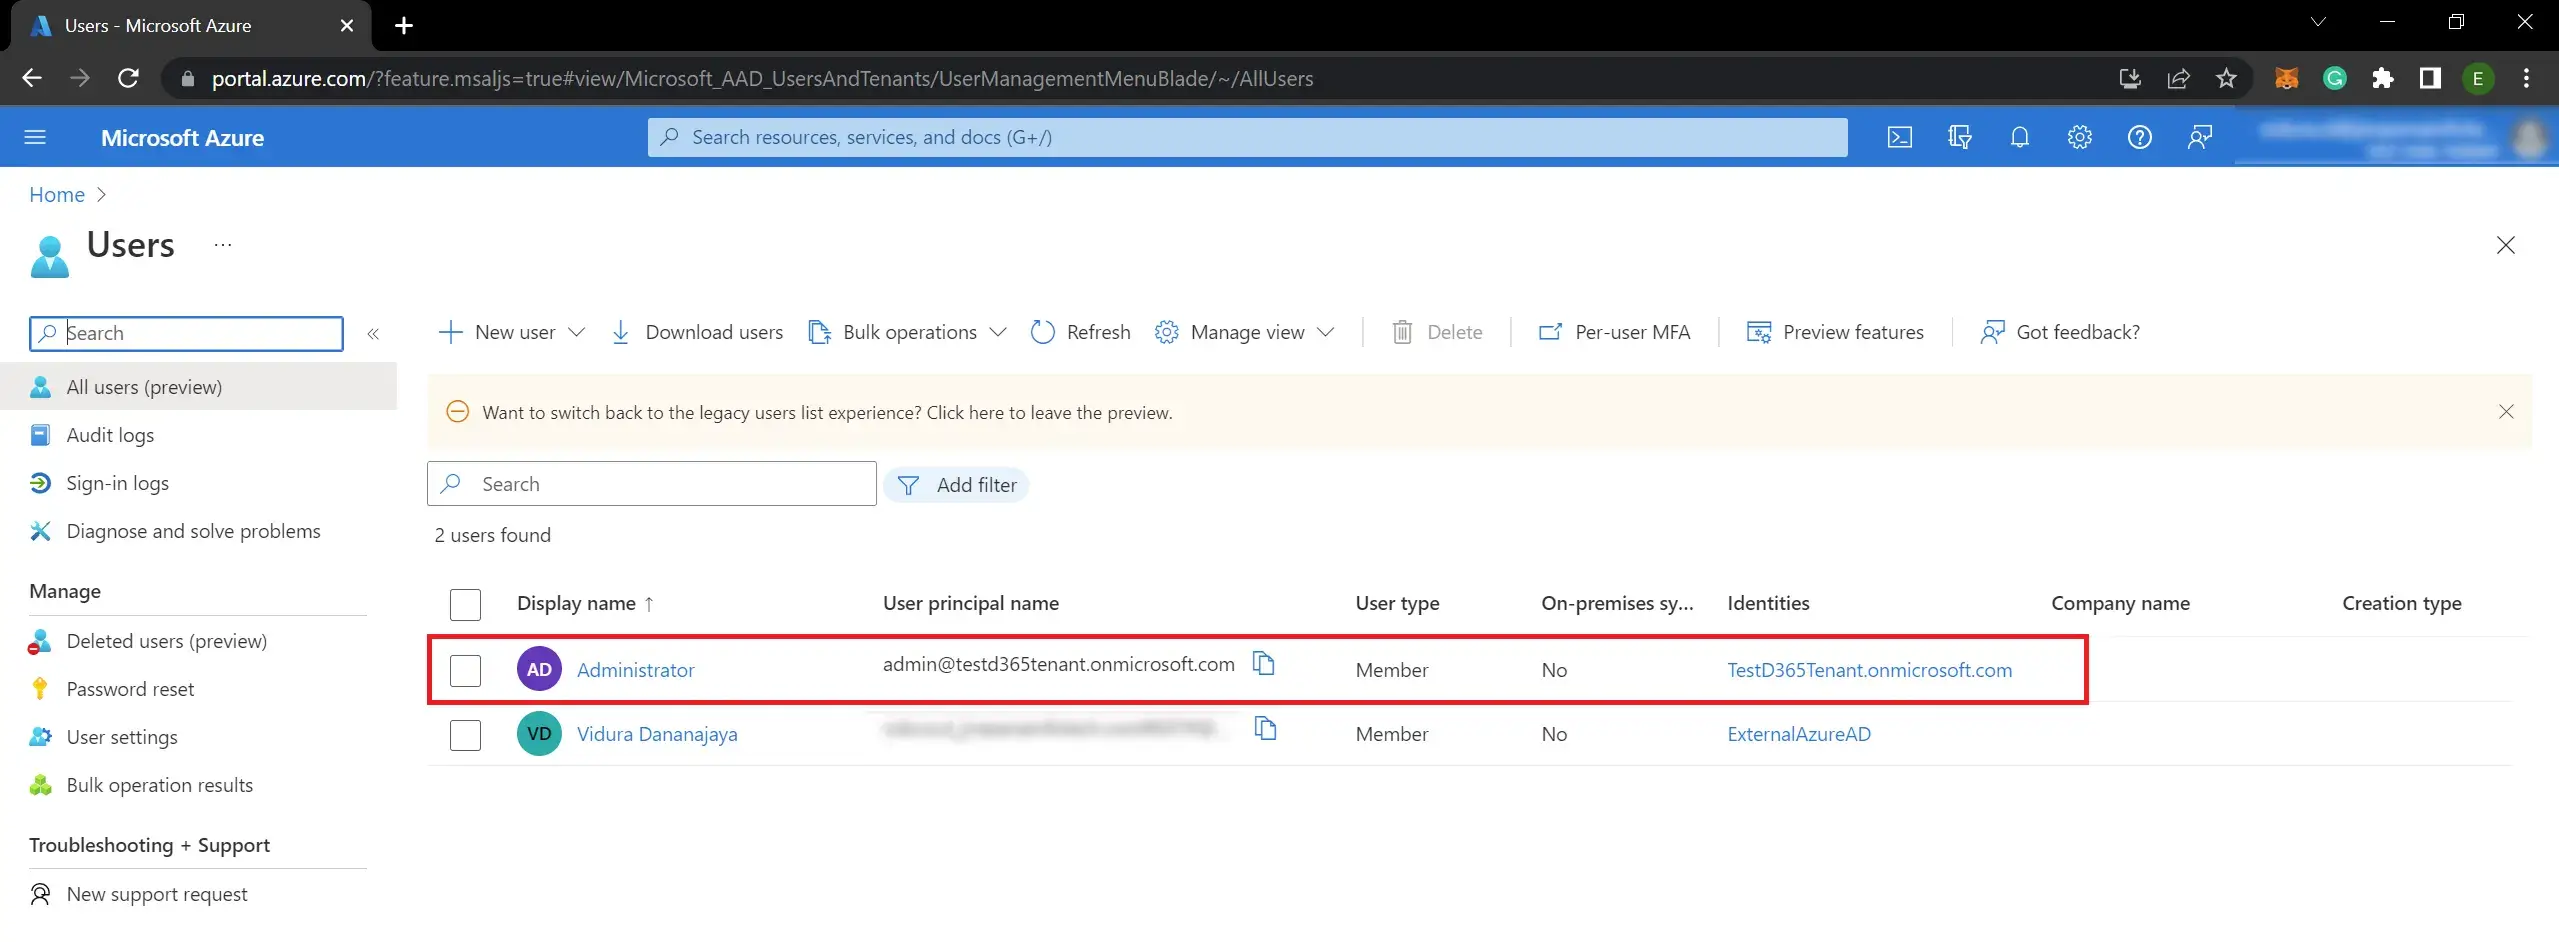 How to create users in Microsoft Azure tenant